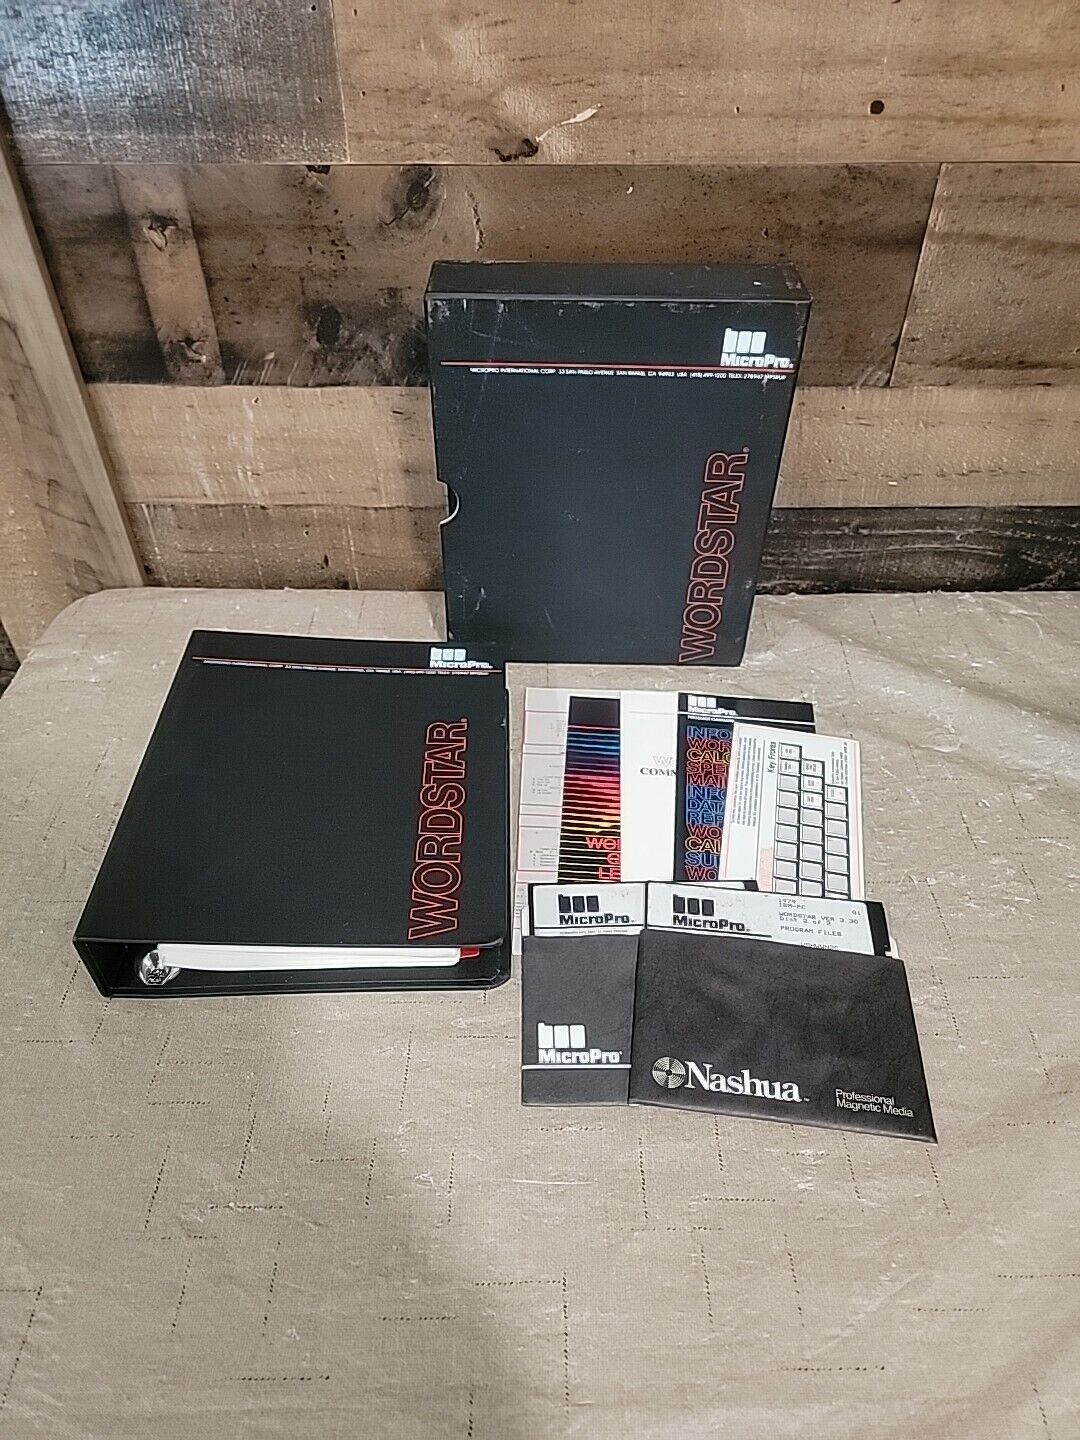 RARE Wordstar 3.30 Disk & Manuals by MicroPro, 1979 - Complete Works